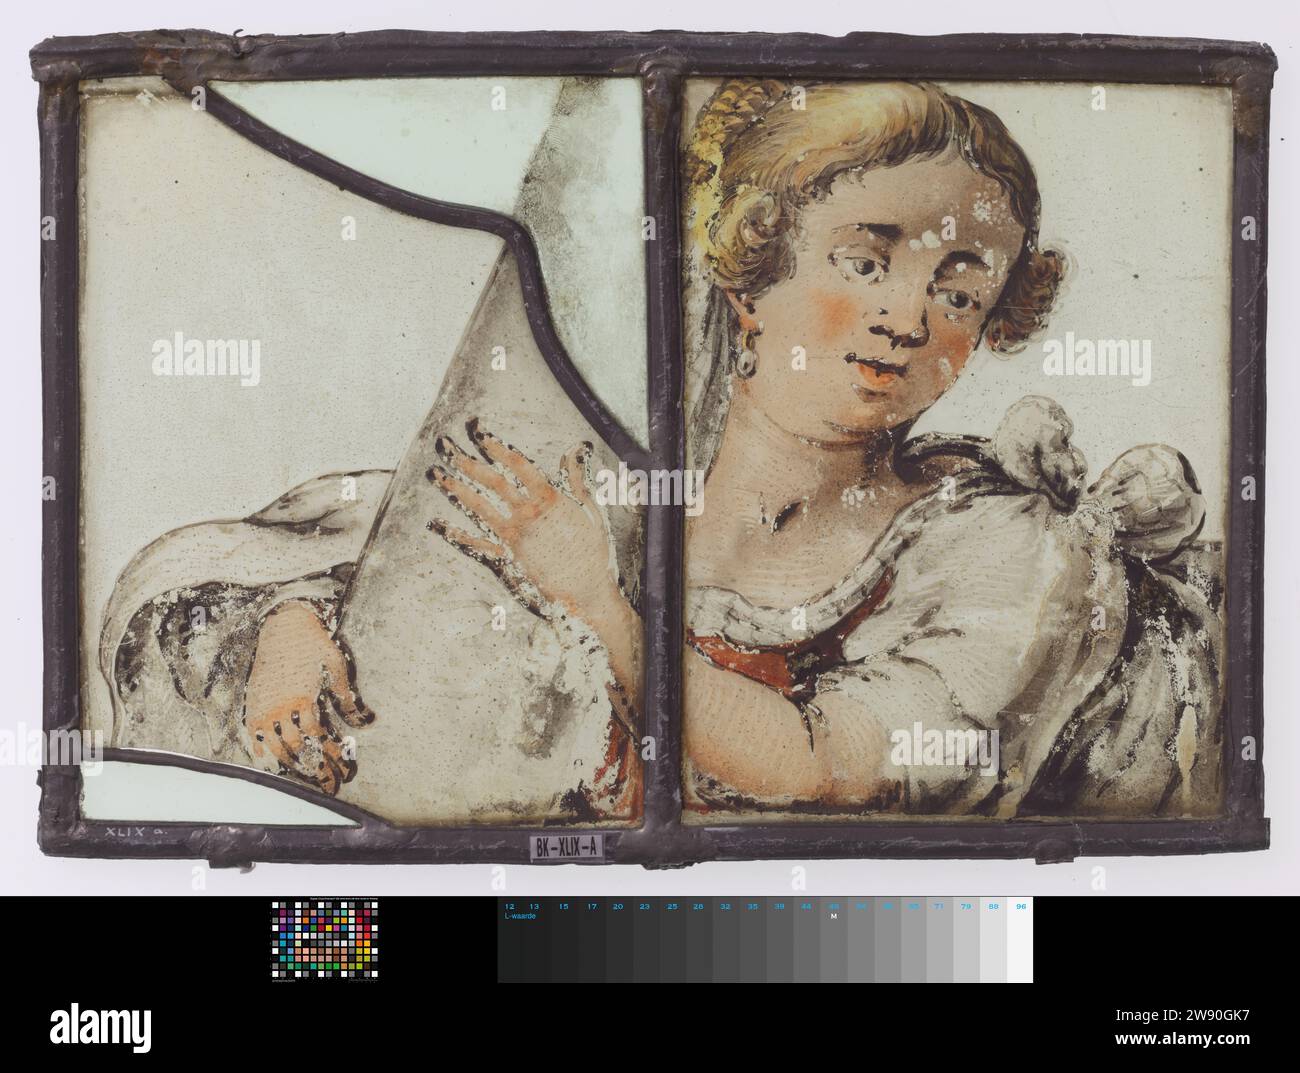 Window with head, shoulders and arms of a female figure, anonymous, c. 1600 - c. 1699  Two windows with email painting shown: head and shoulders of a woman who carries a cylindrical object. Belong to group inv. Nos. BK-XLIX-A T/M G.  glass. lead (metal).. Stock Photo